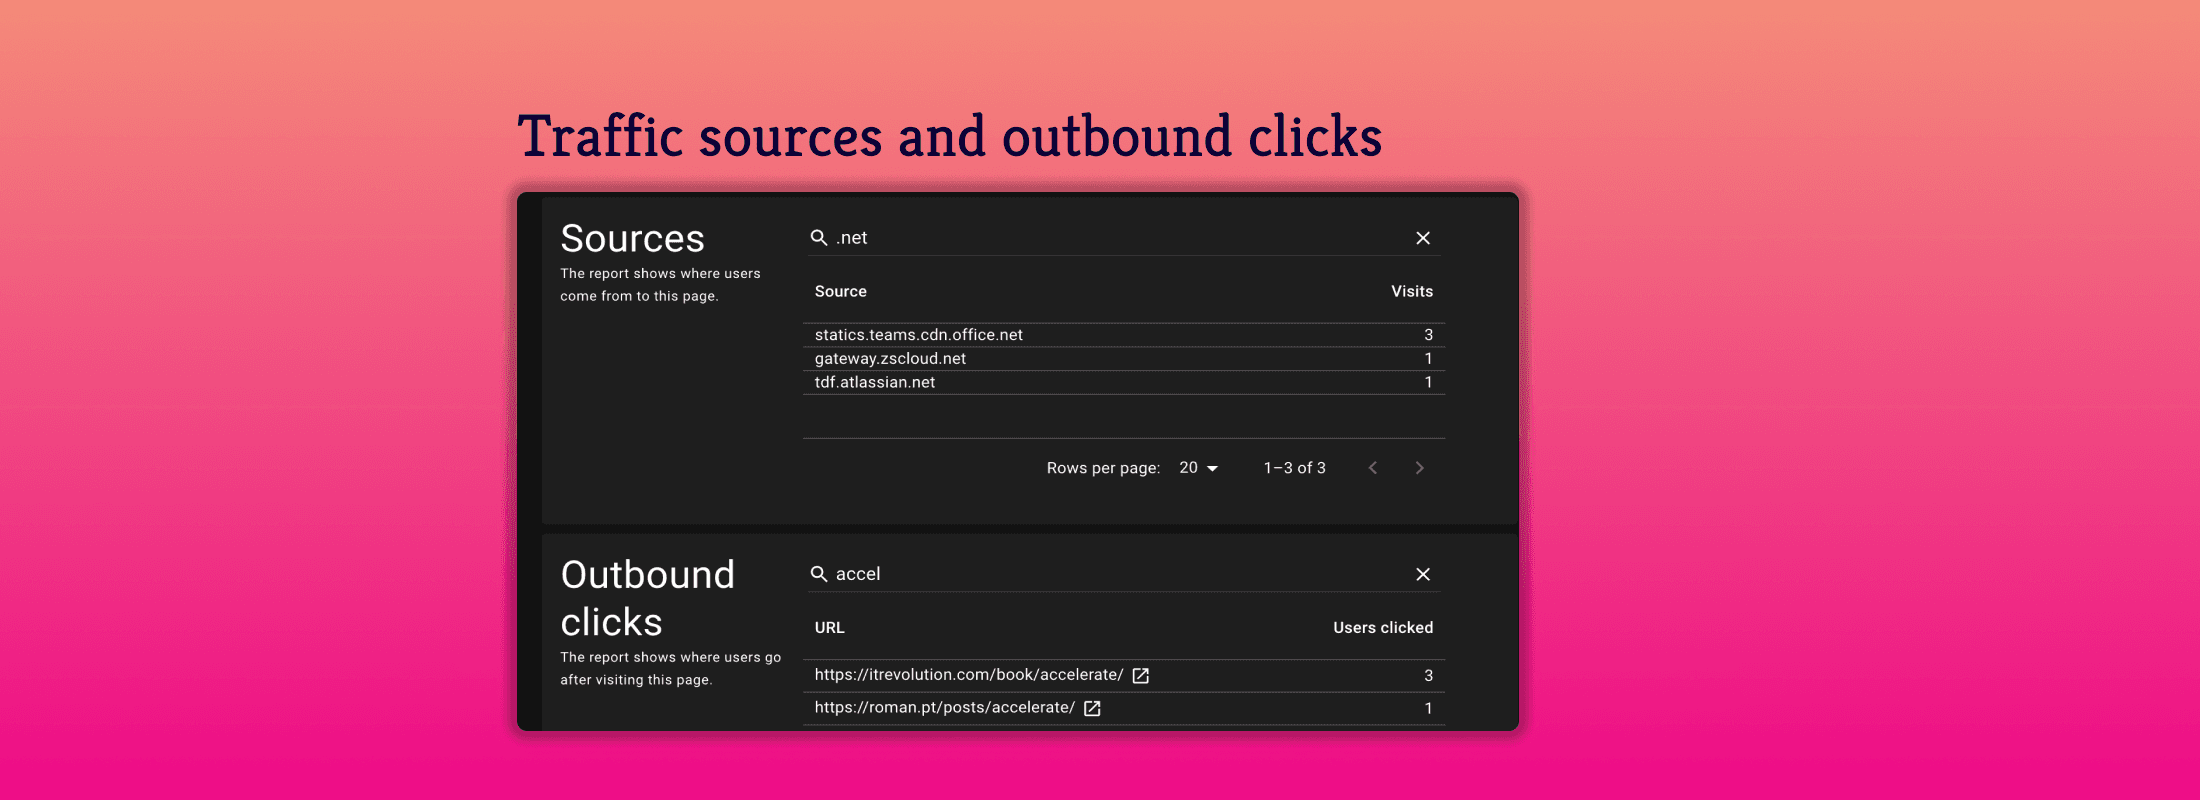 Traffic sources and outbound links